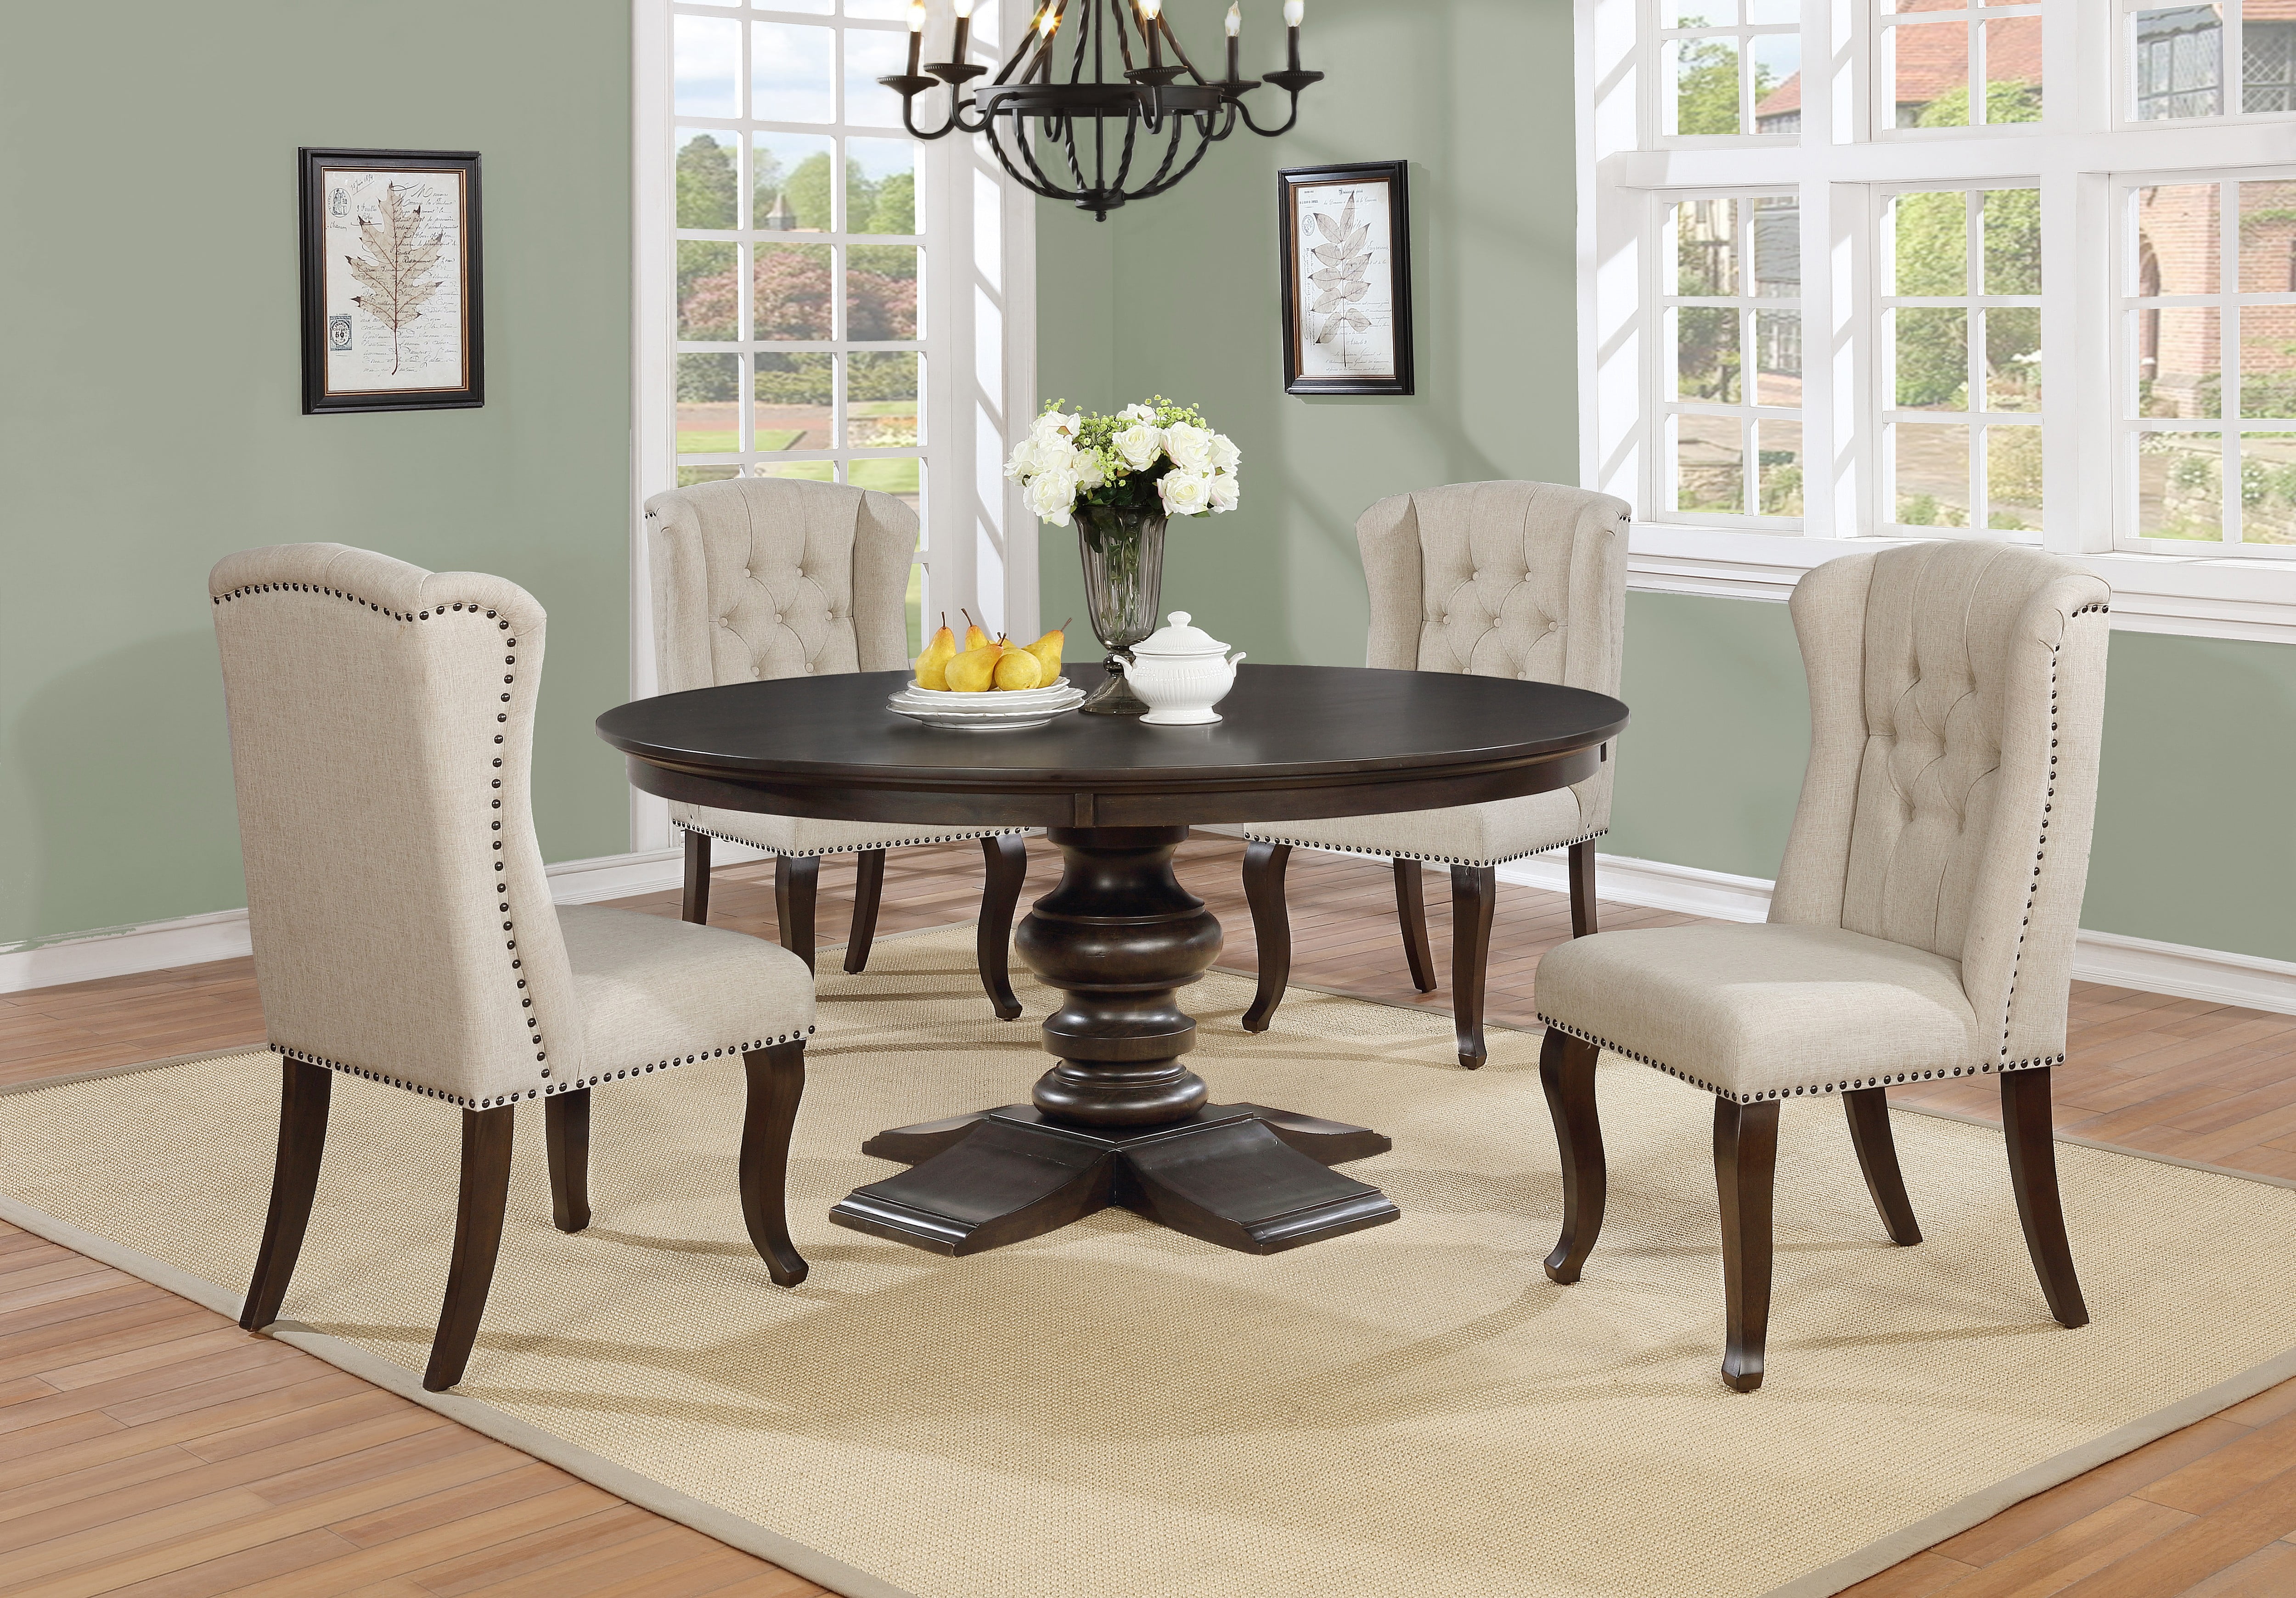 4 Beige Dining Room Table And Chairs